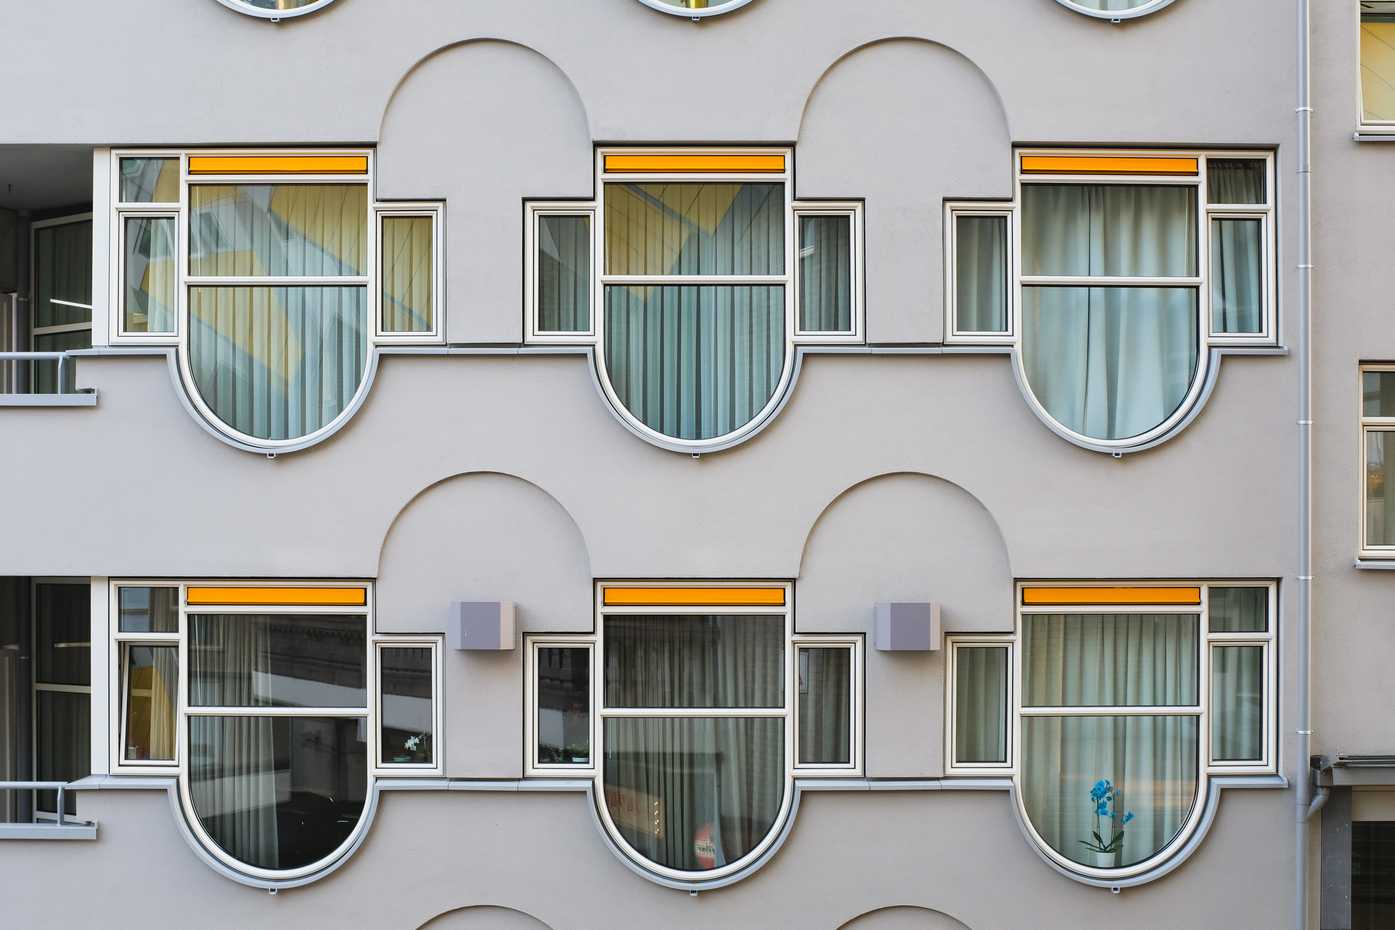 Quirky, rounded windows.